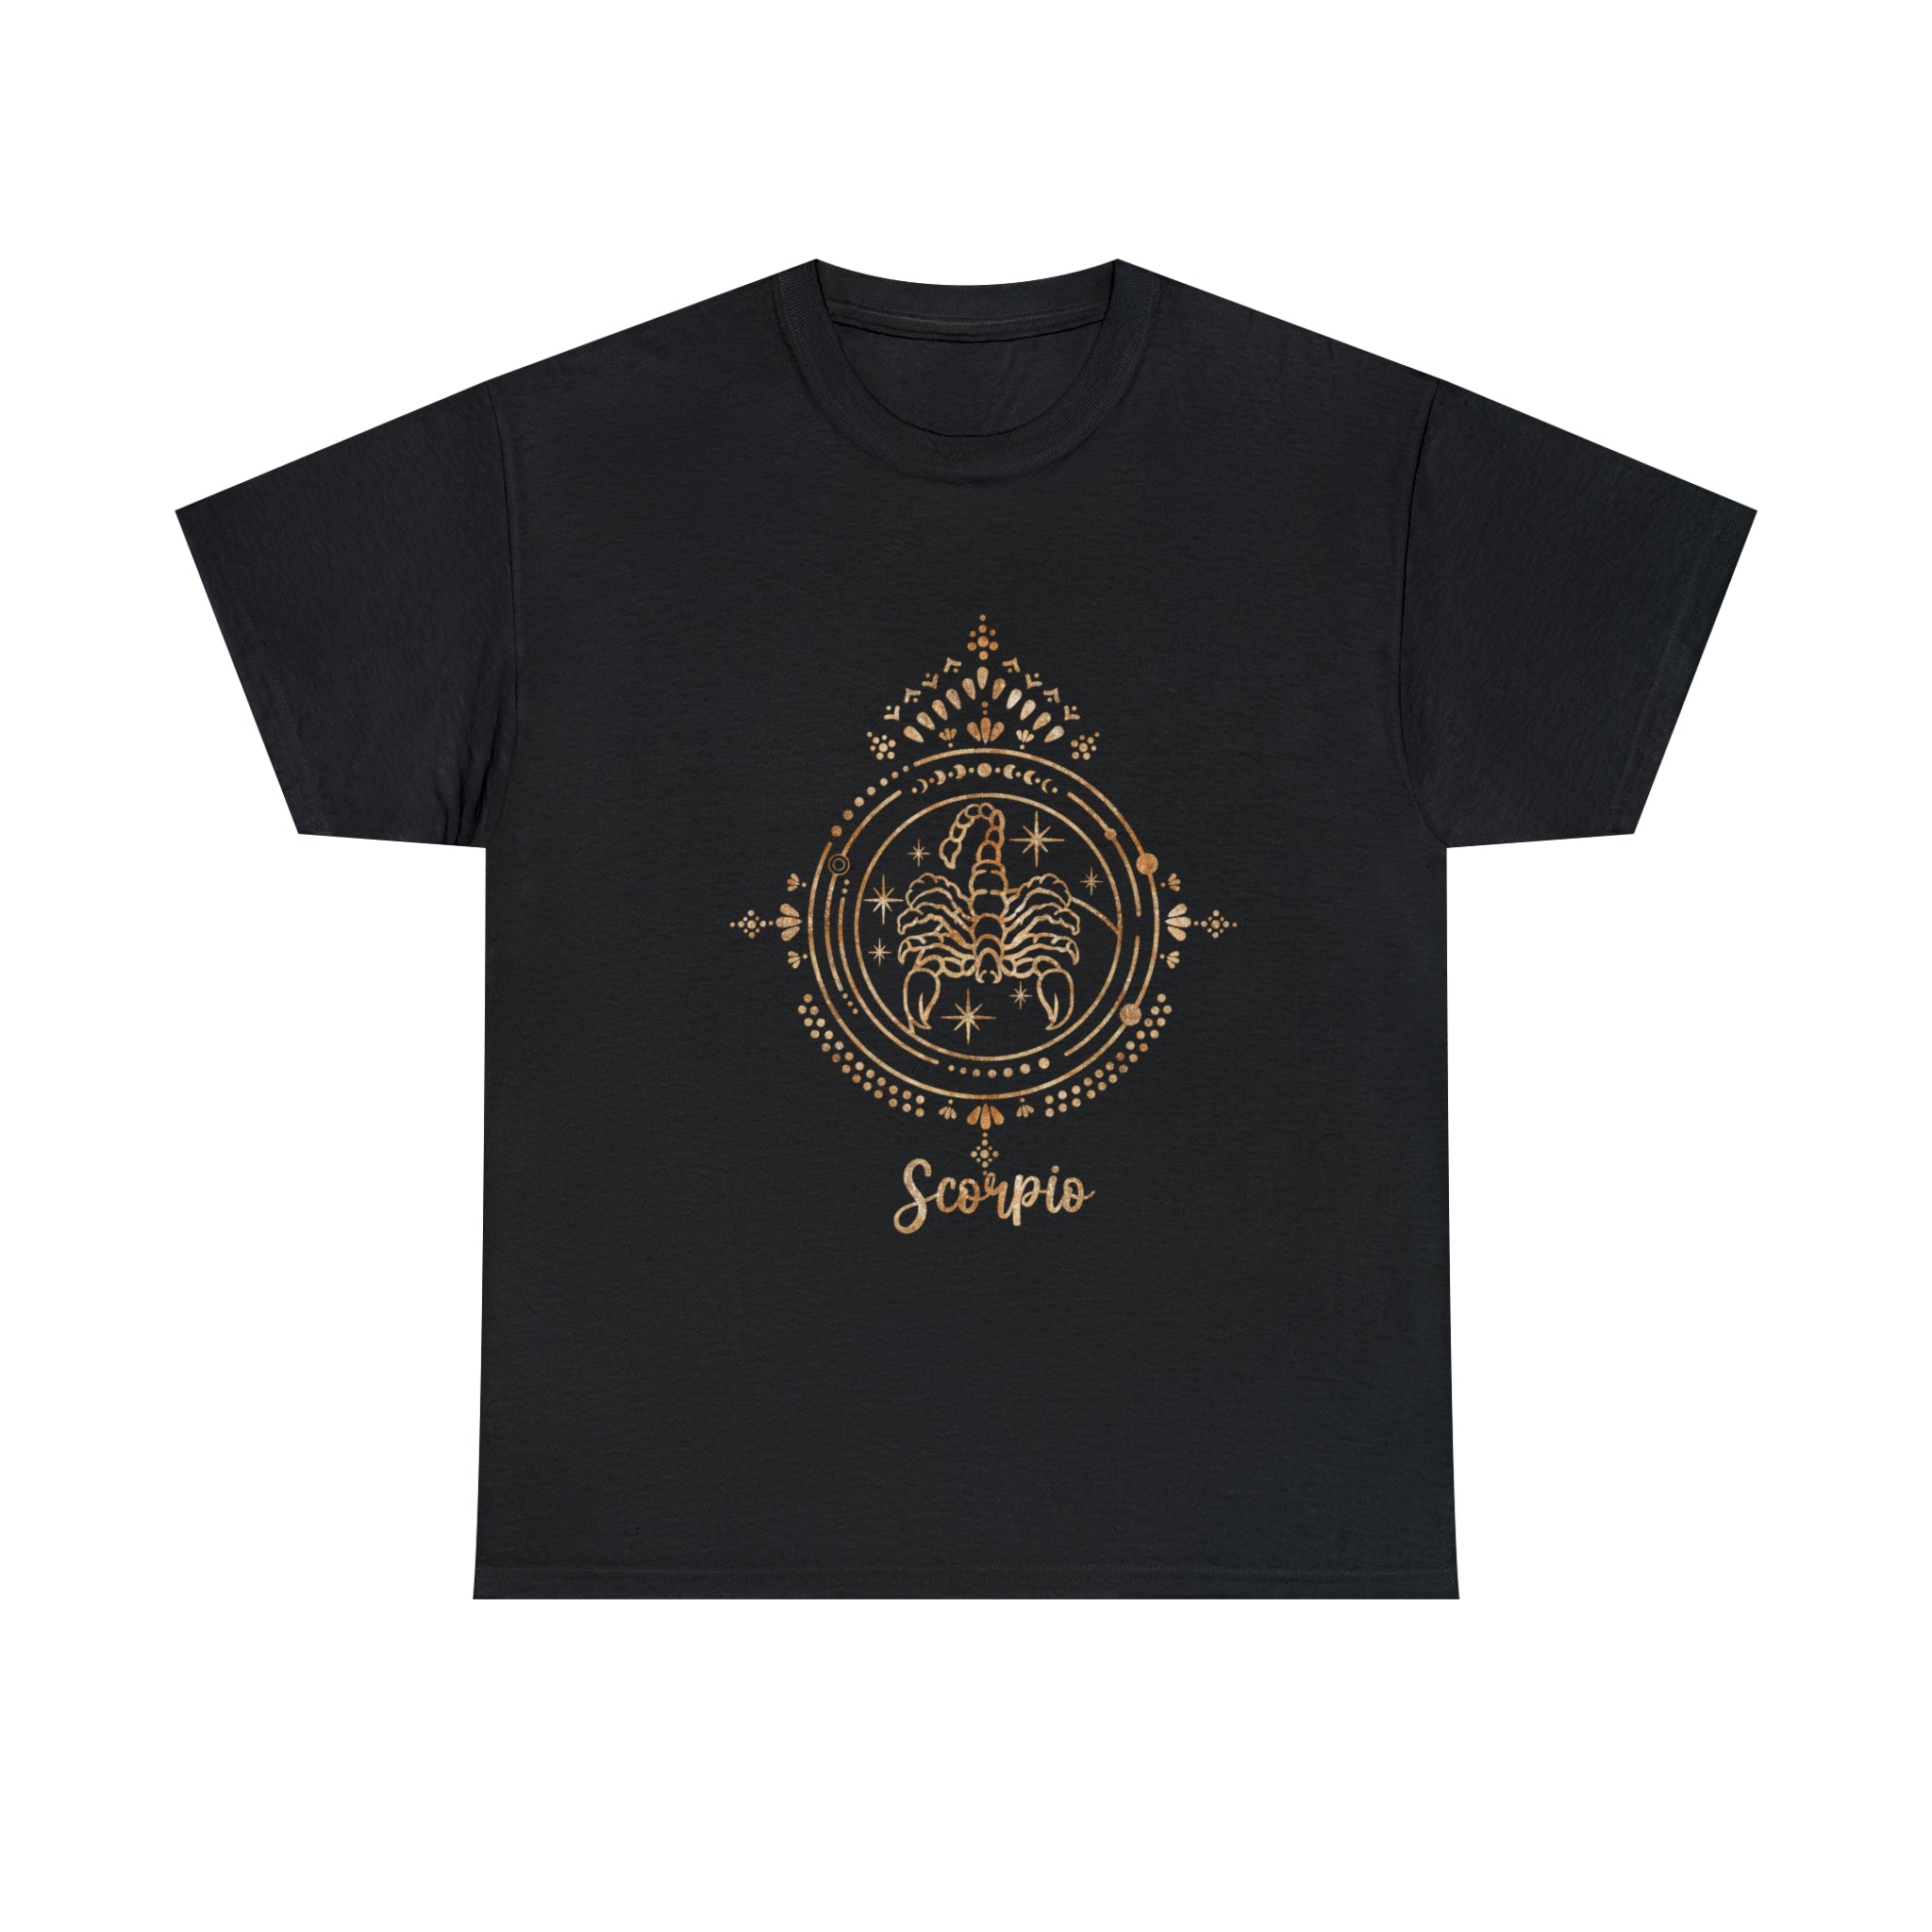 A passionate Scorpio T-Shirt with a gold design on it.